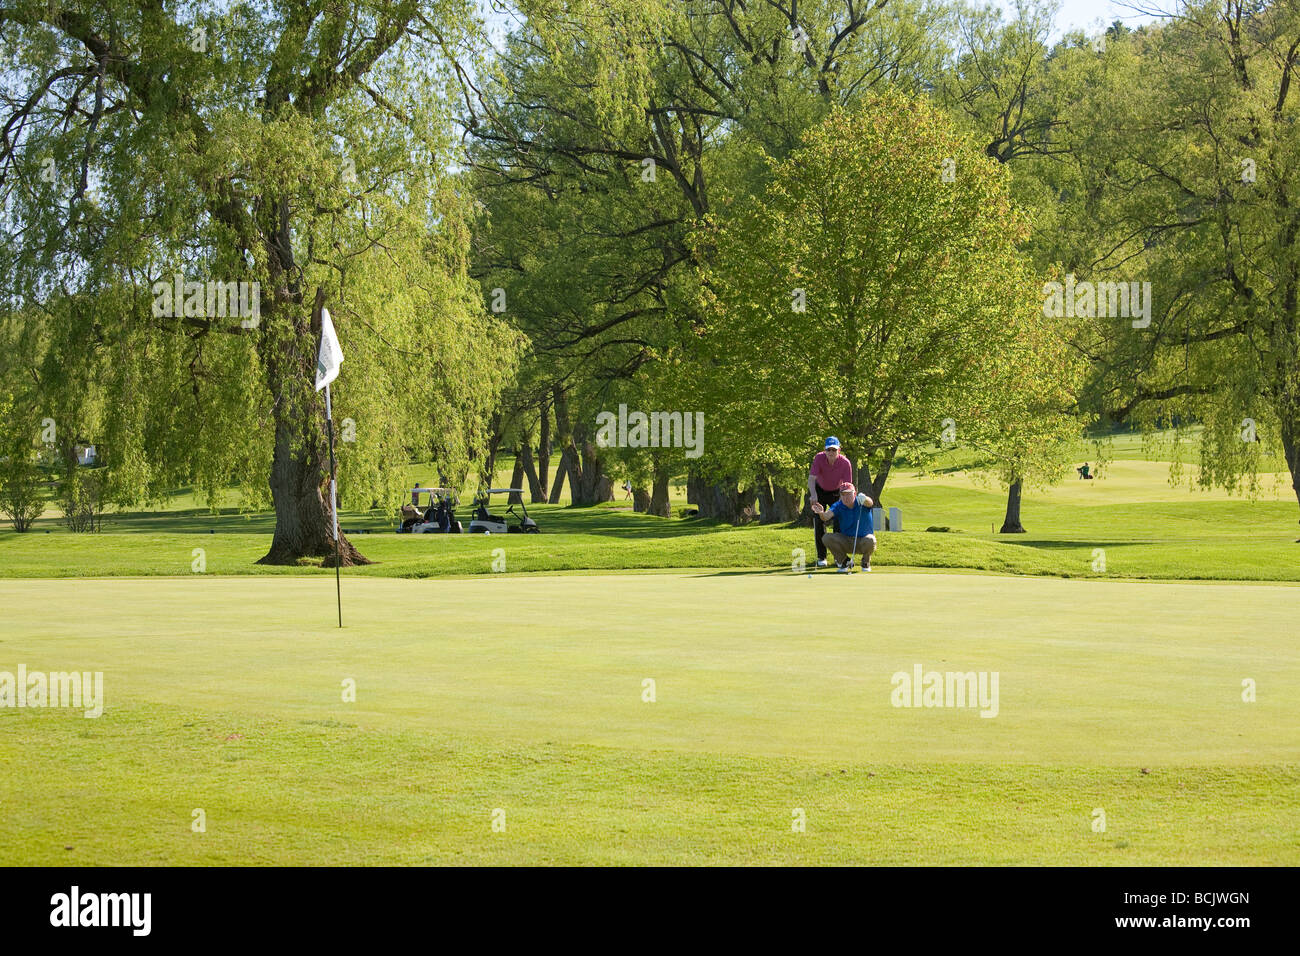 Leatherstocking Golf Course in Cooperstown, NY Stock Photo